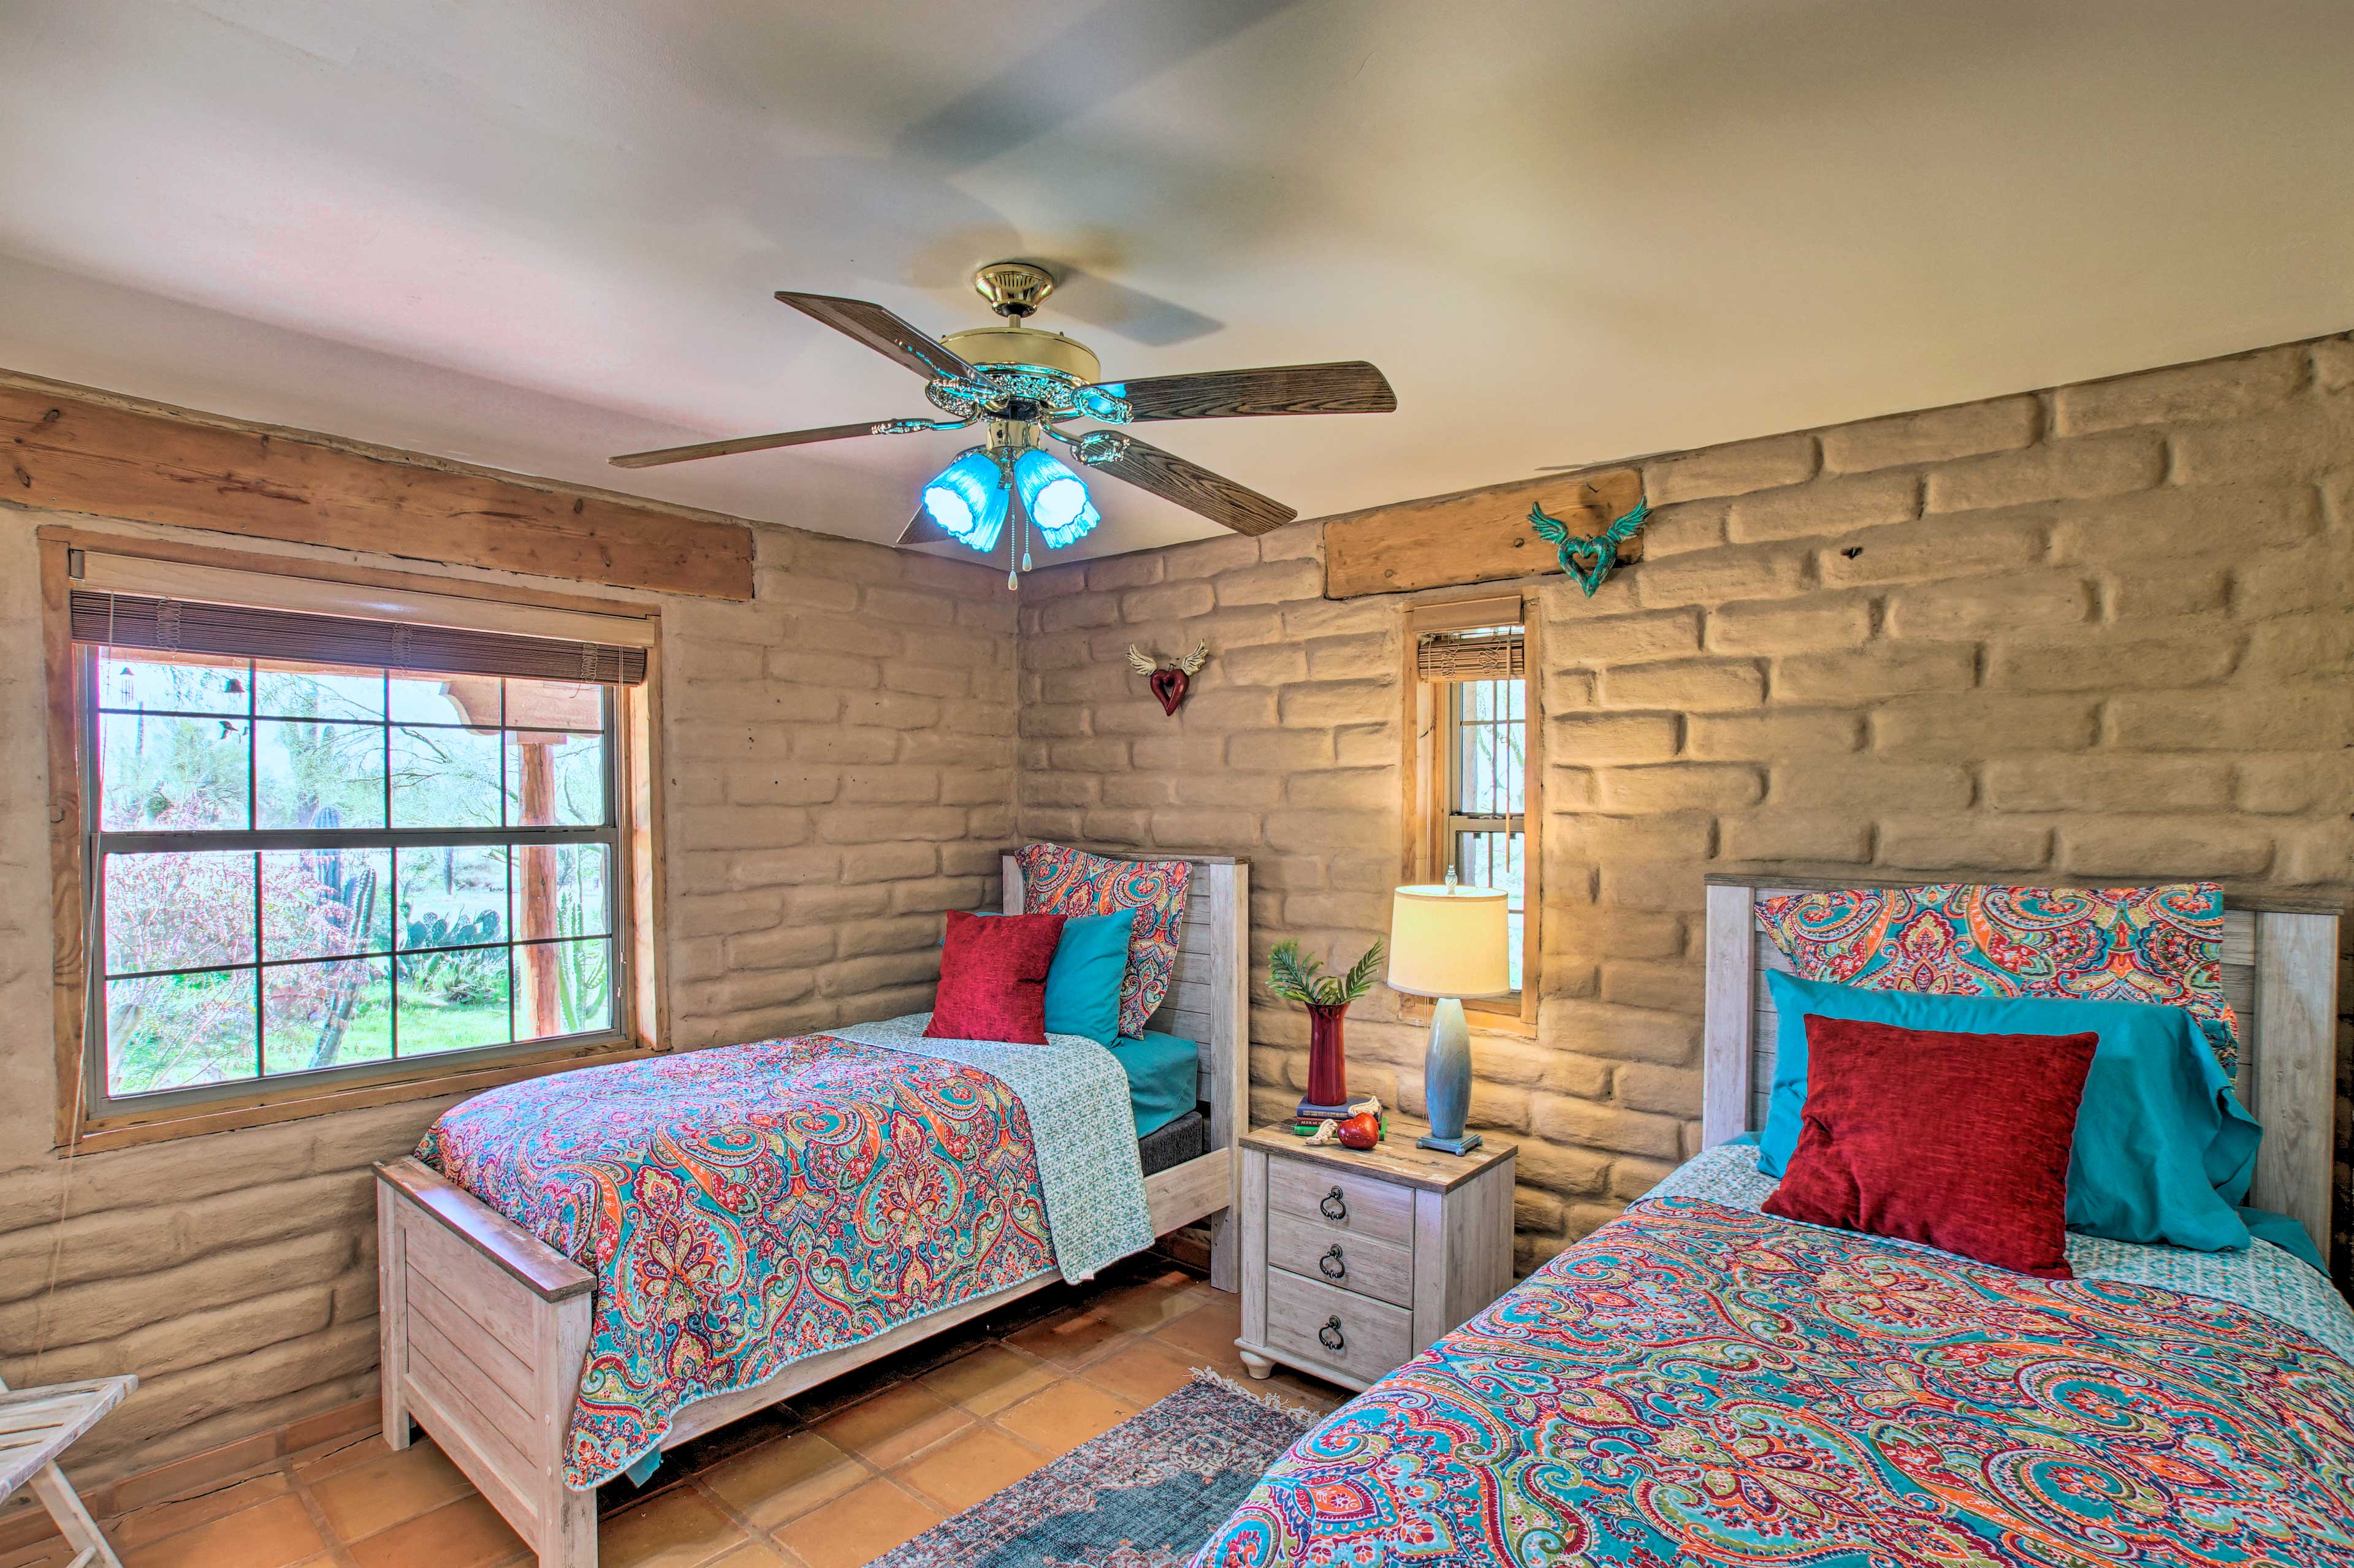 Two guests will enjoy this adorable bedroom!